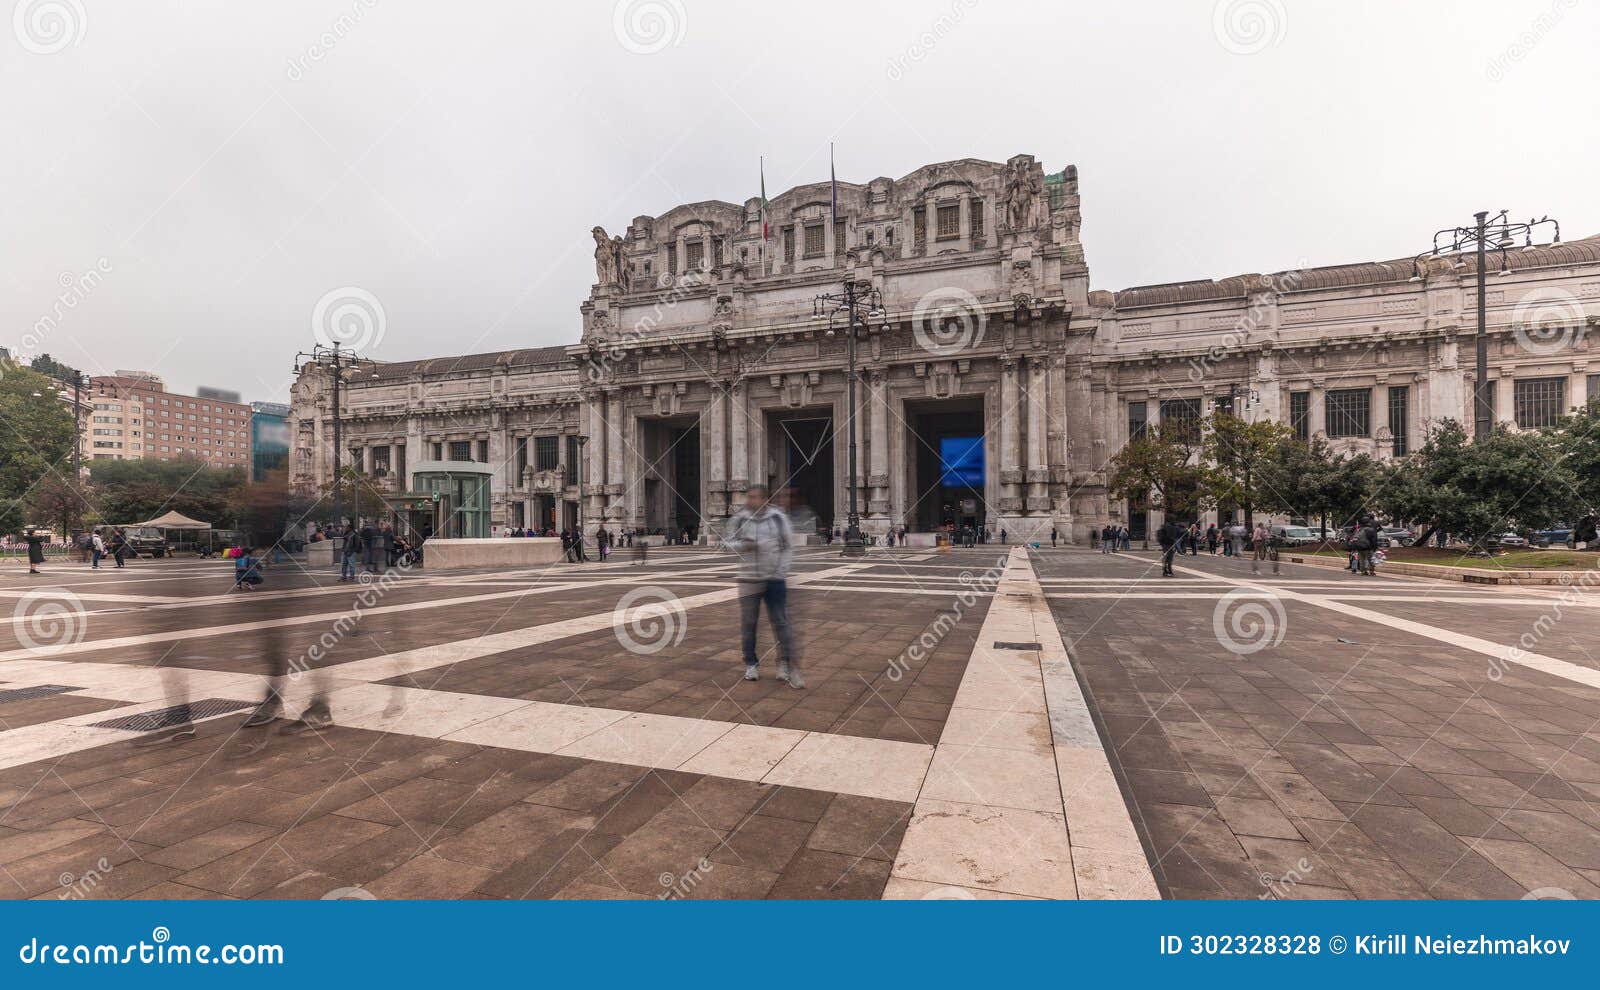 panorama showing milano centrale timelapse - the main central railway station of the city of milan in italy.